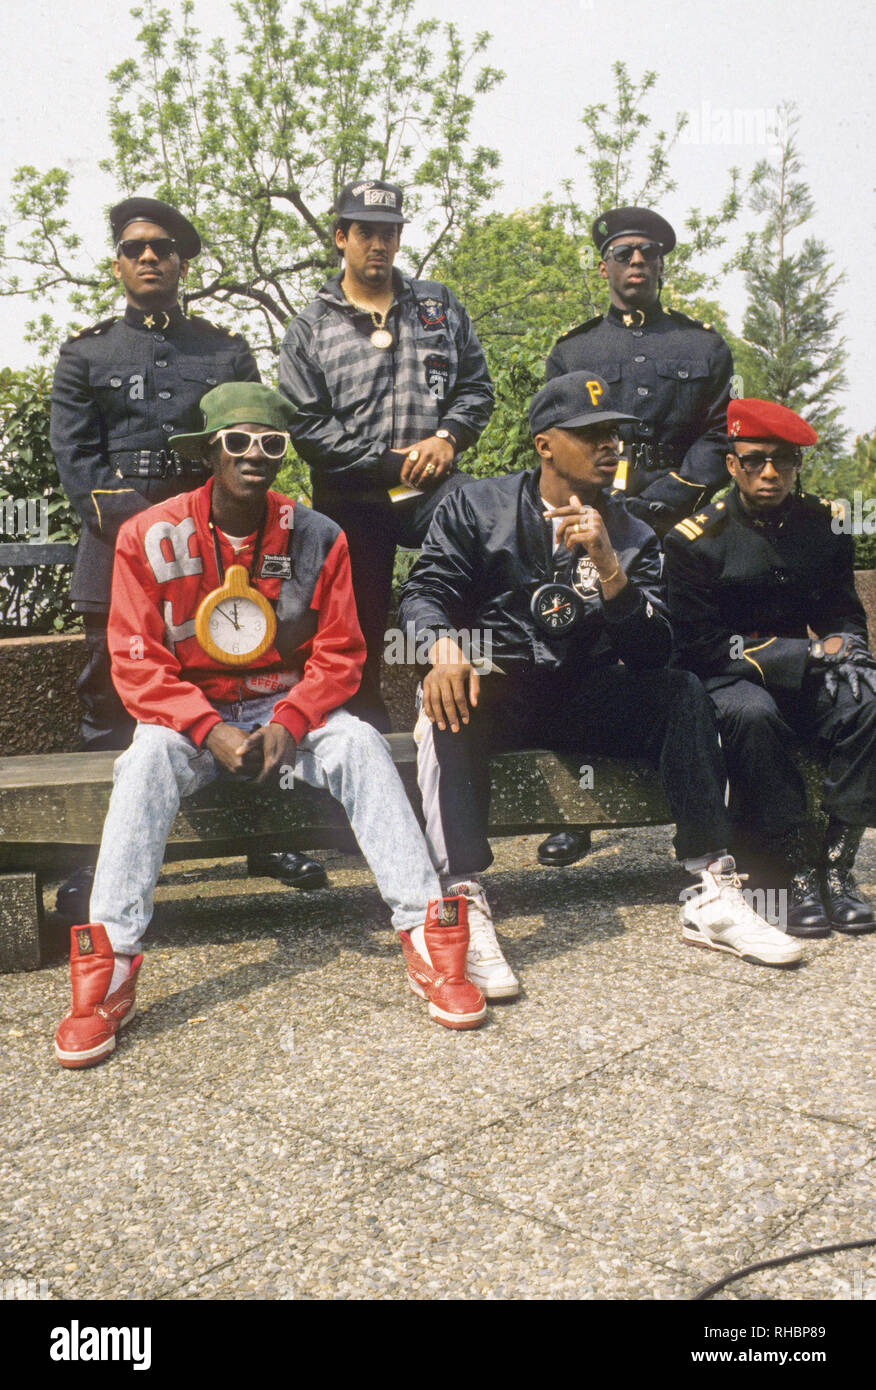 PUBLIC ENEMY American hip-hop group about 1990 Stock Photo